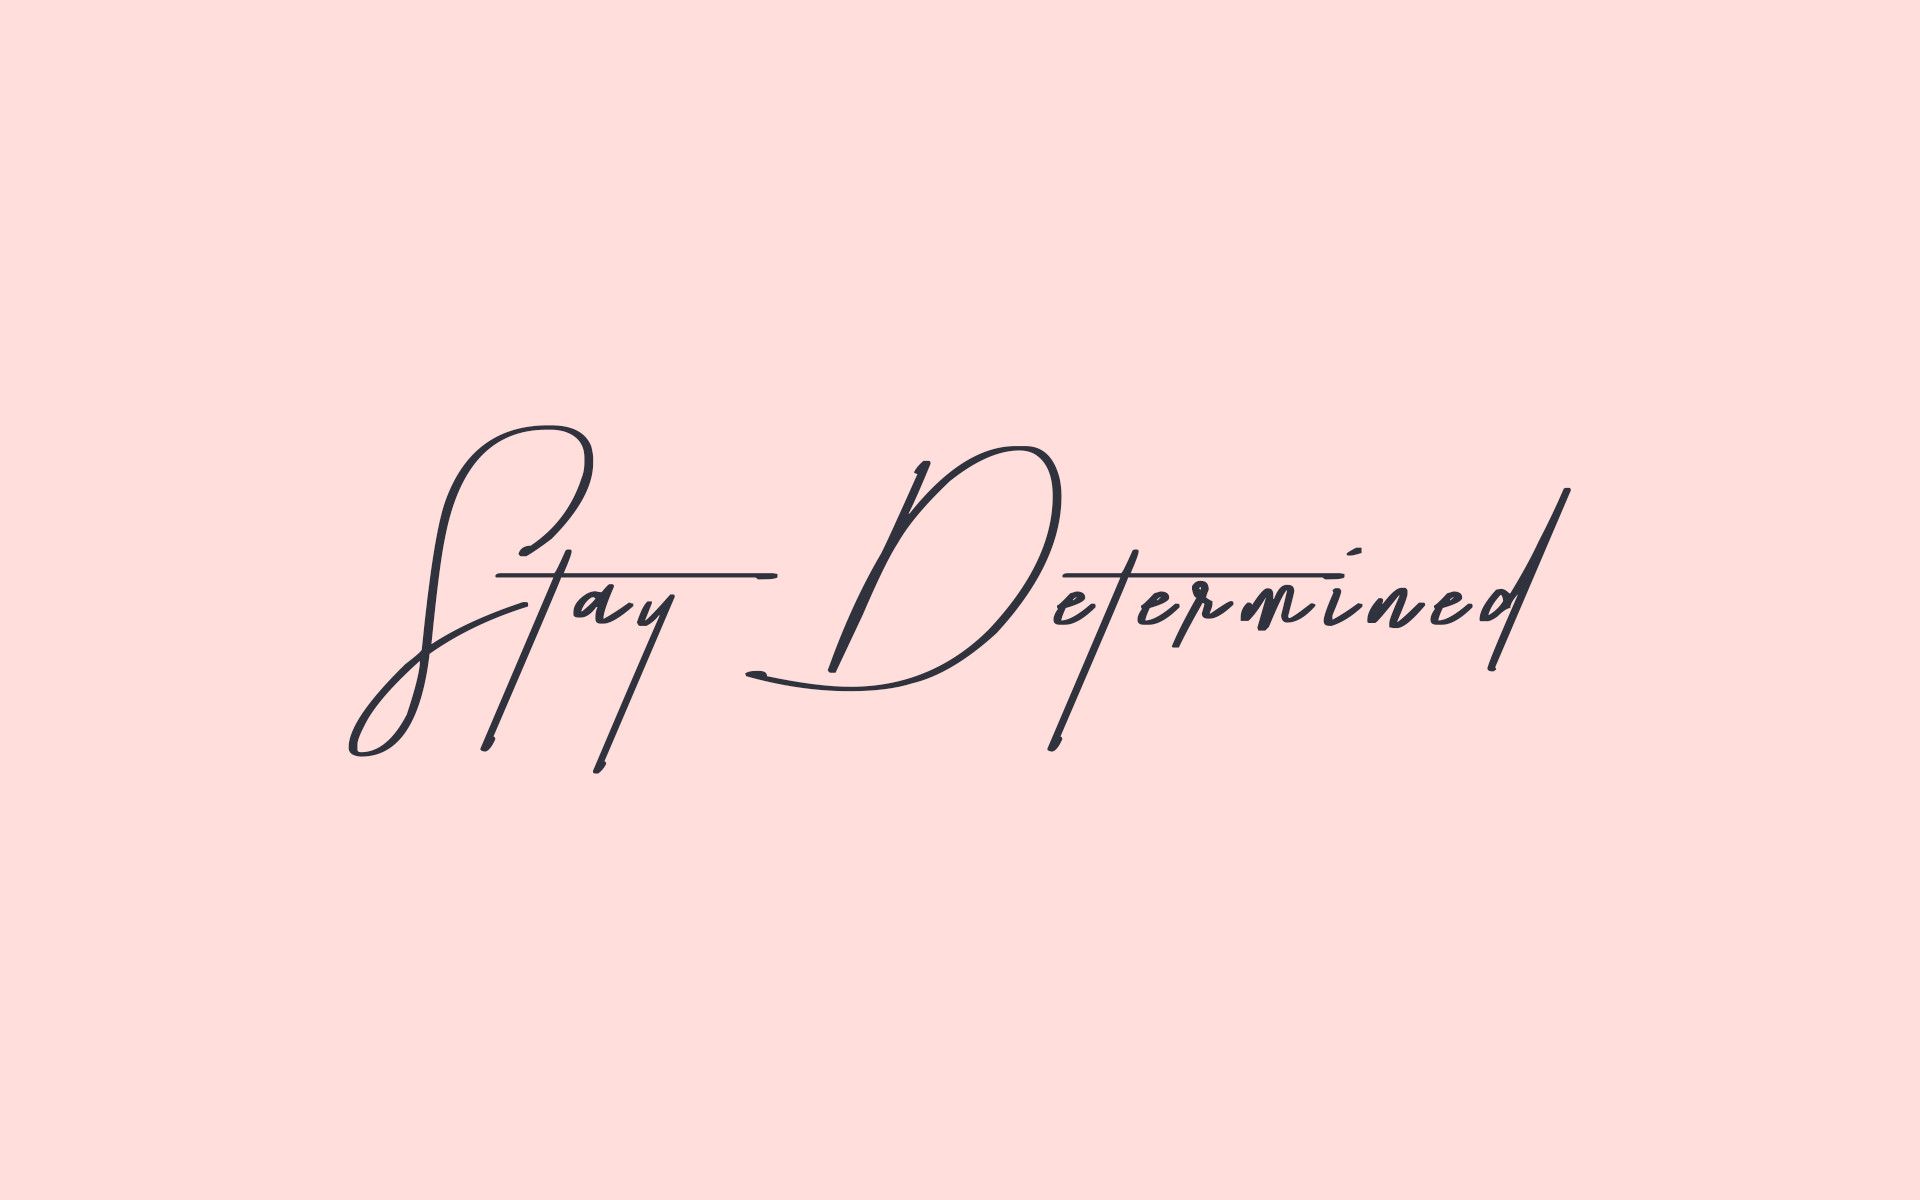 Keep yourself motivated with this cute pink + navy desktop wallpaper by. Cute desktop wallpaper, Laptop wallpaper quotes, Imac wallpaper